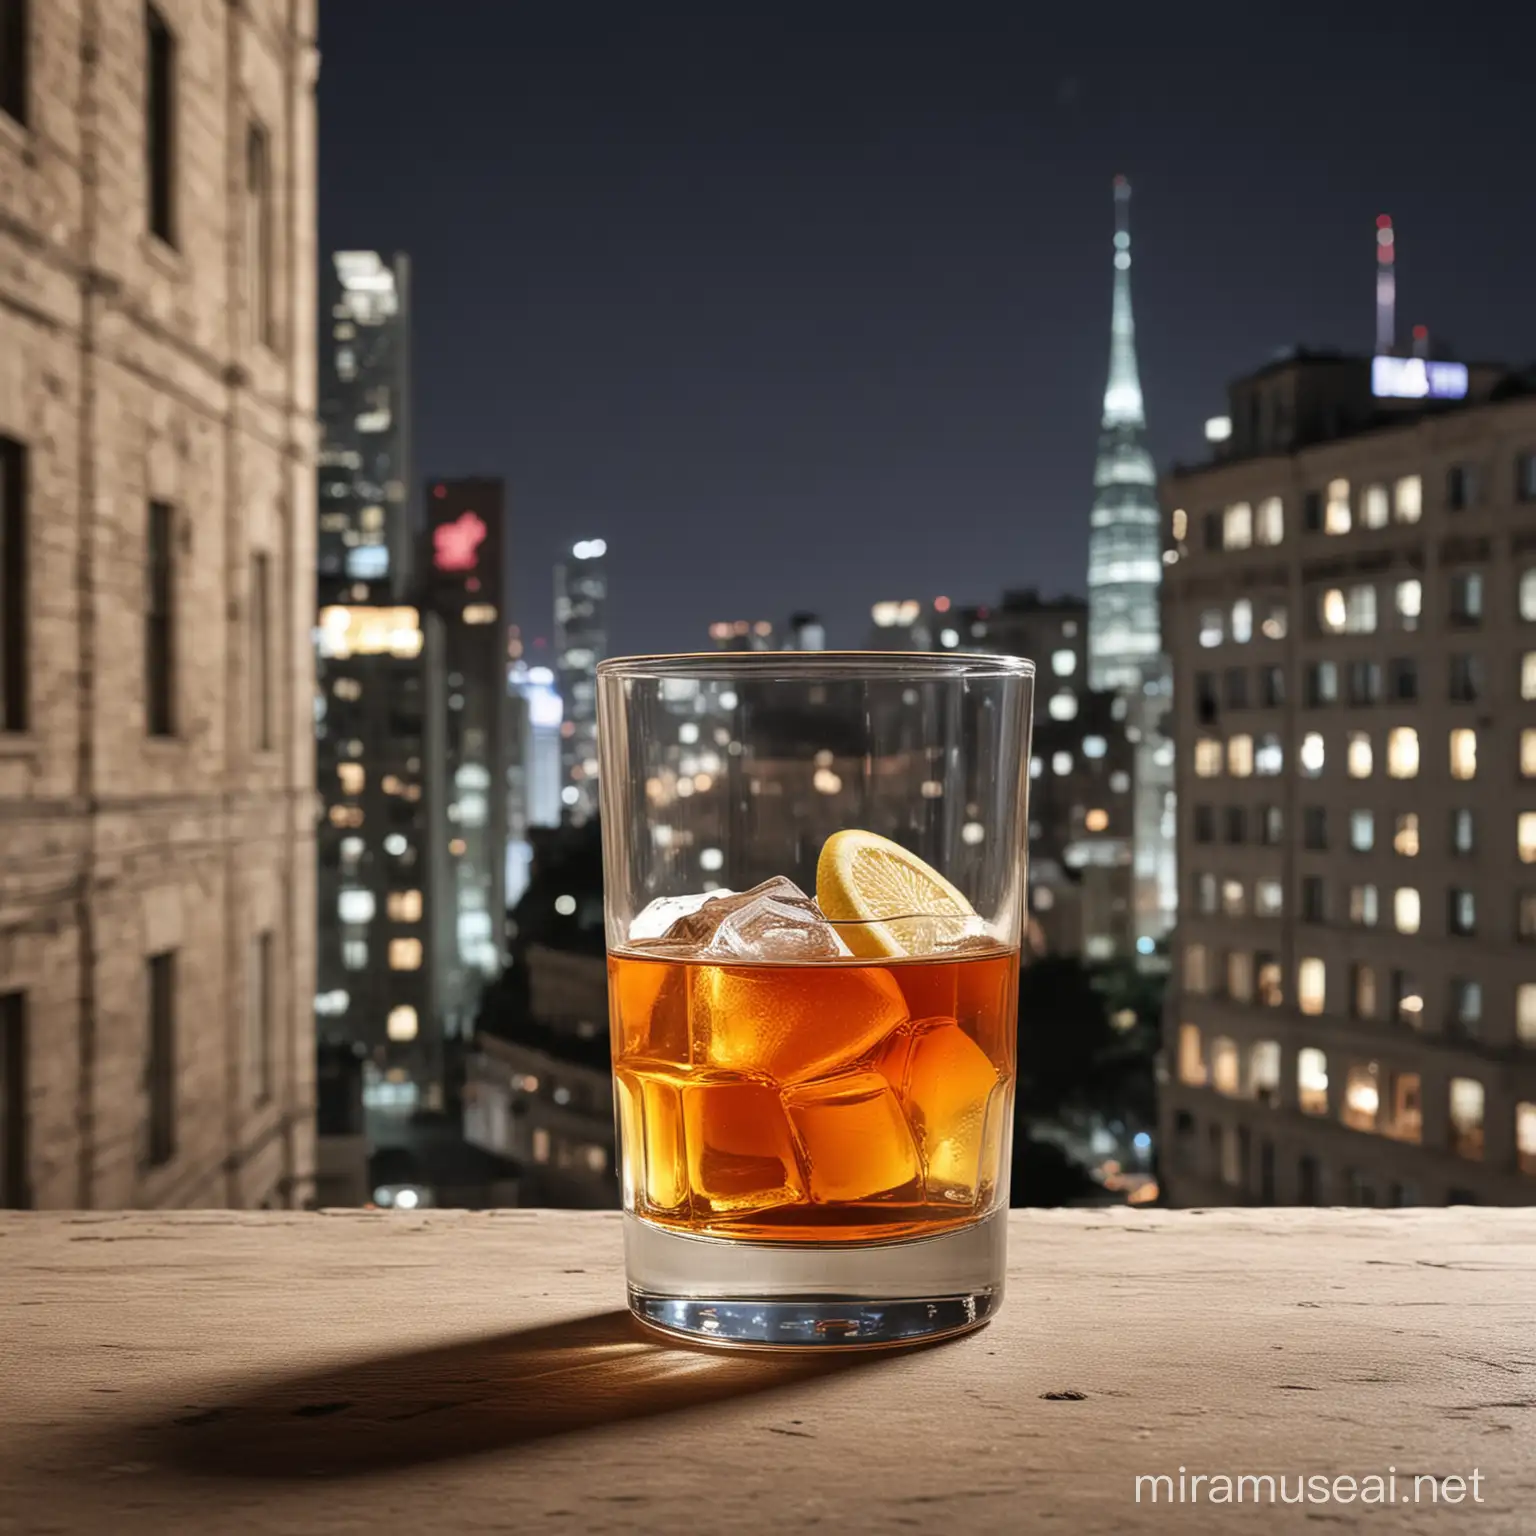 adv for drink in a glass with urban background